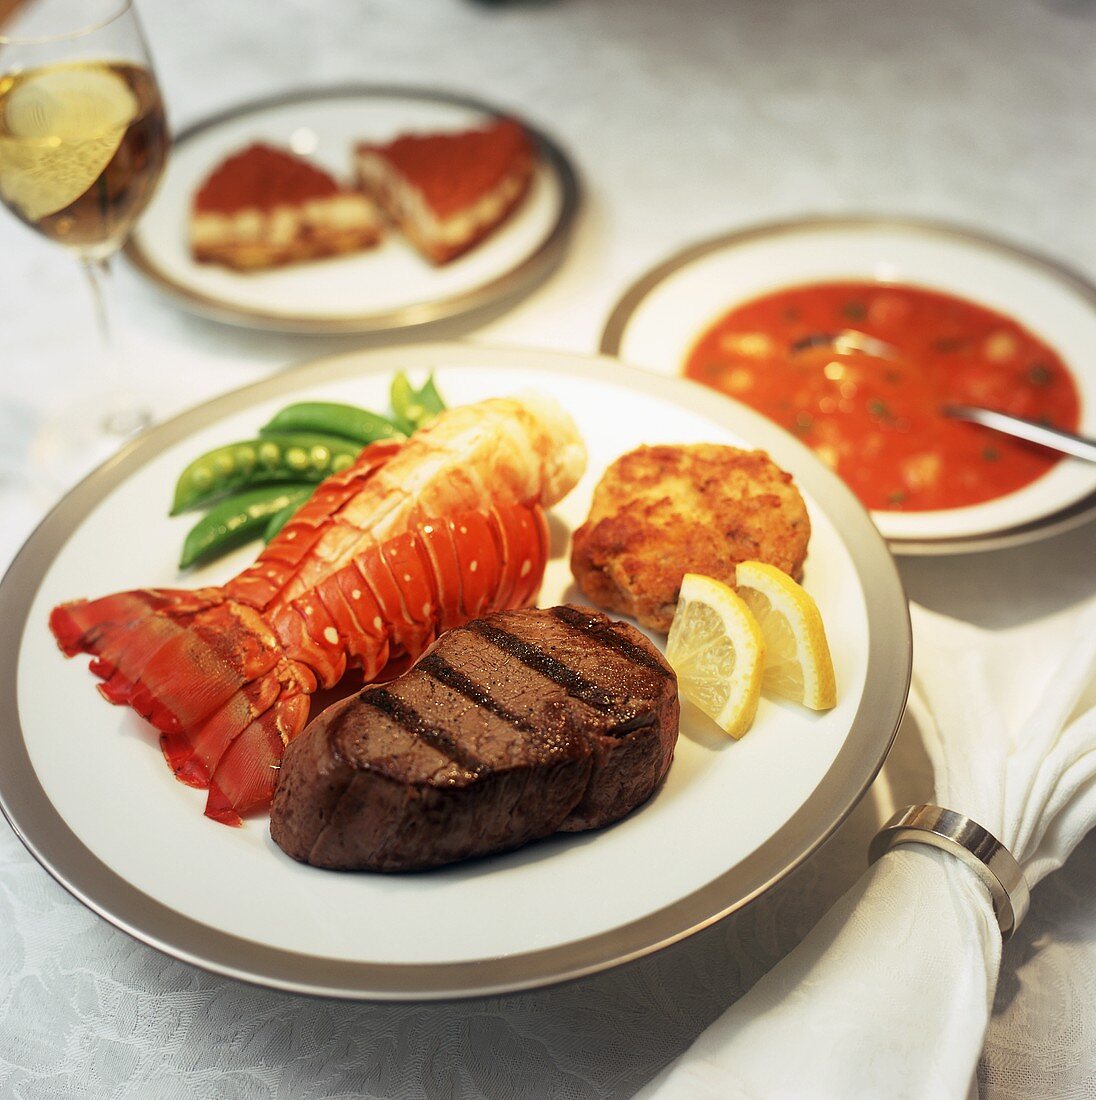 Surf and Turf: Lobster Tail with Steak